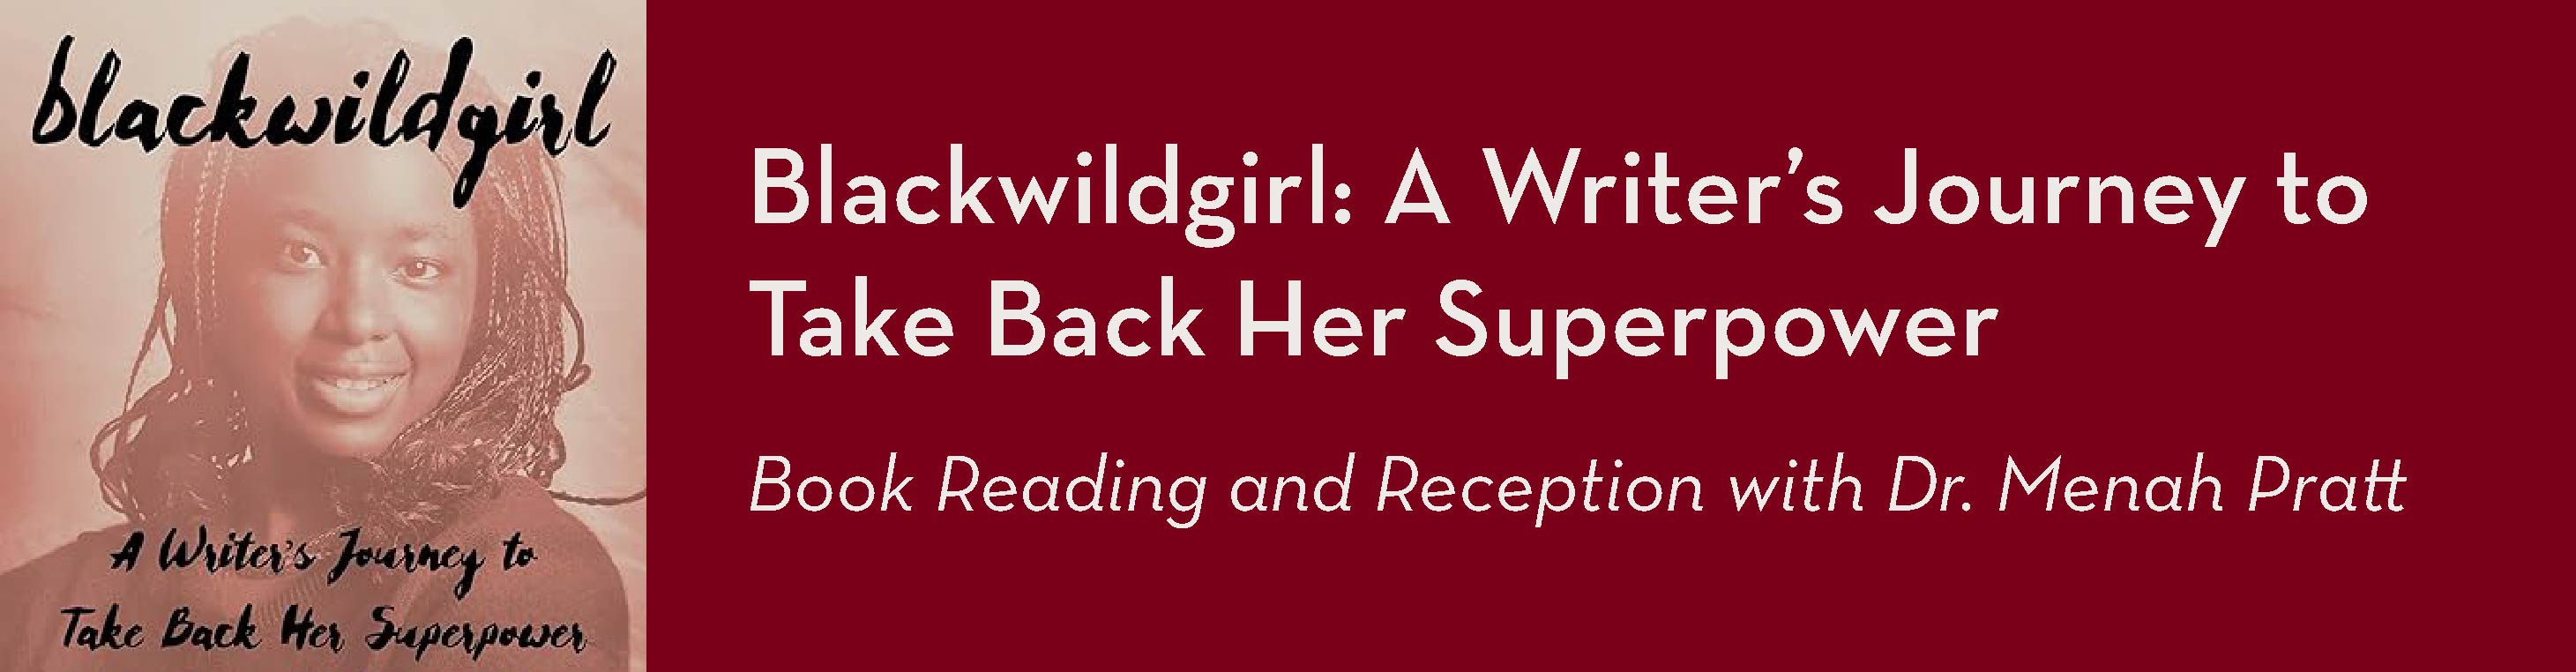 Blackwildgirl: A Writer's Journey to Take Back Her Superpower; Book reading and reception with Dr. Menah Pratt